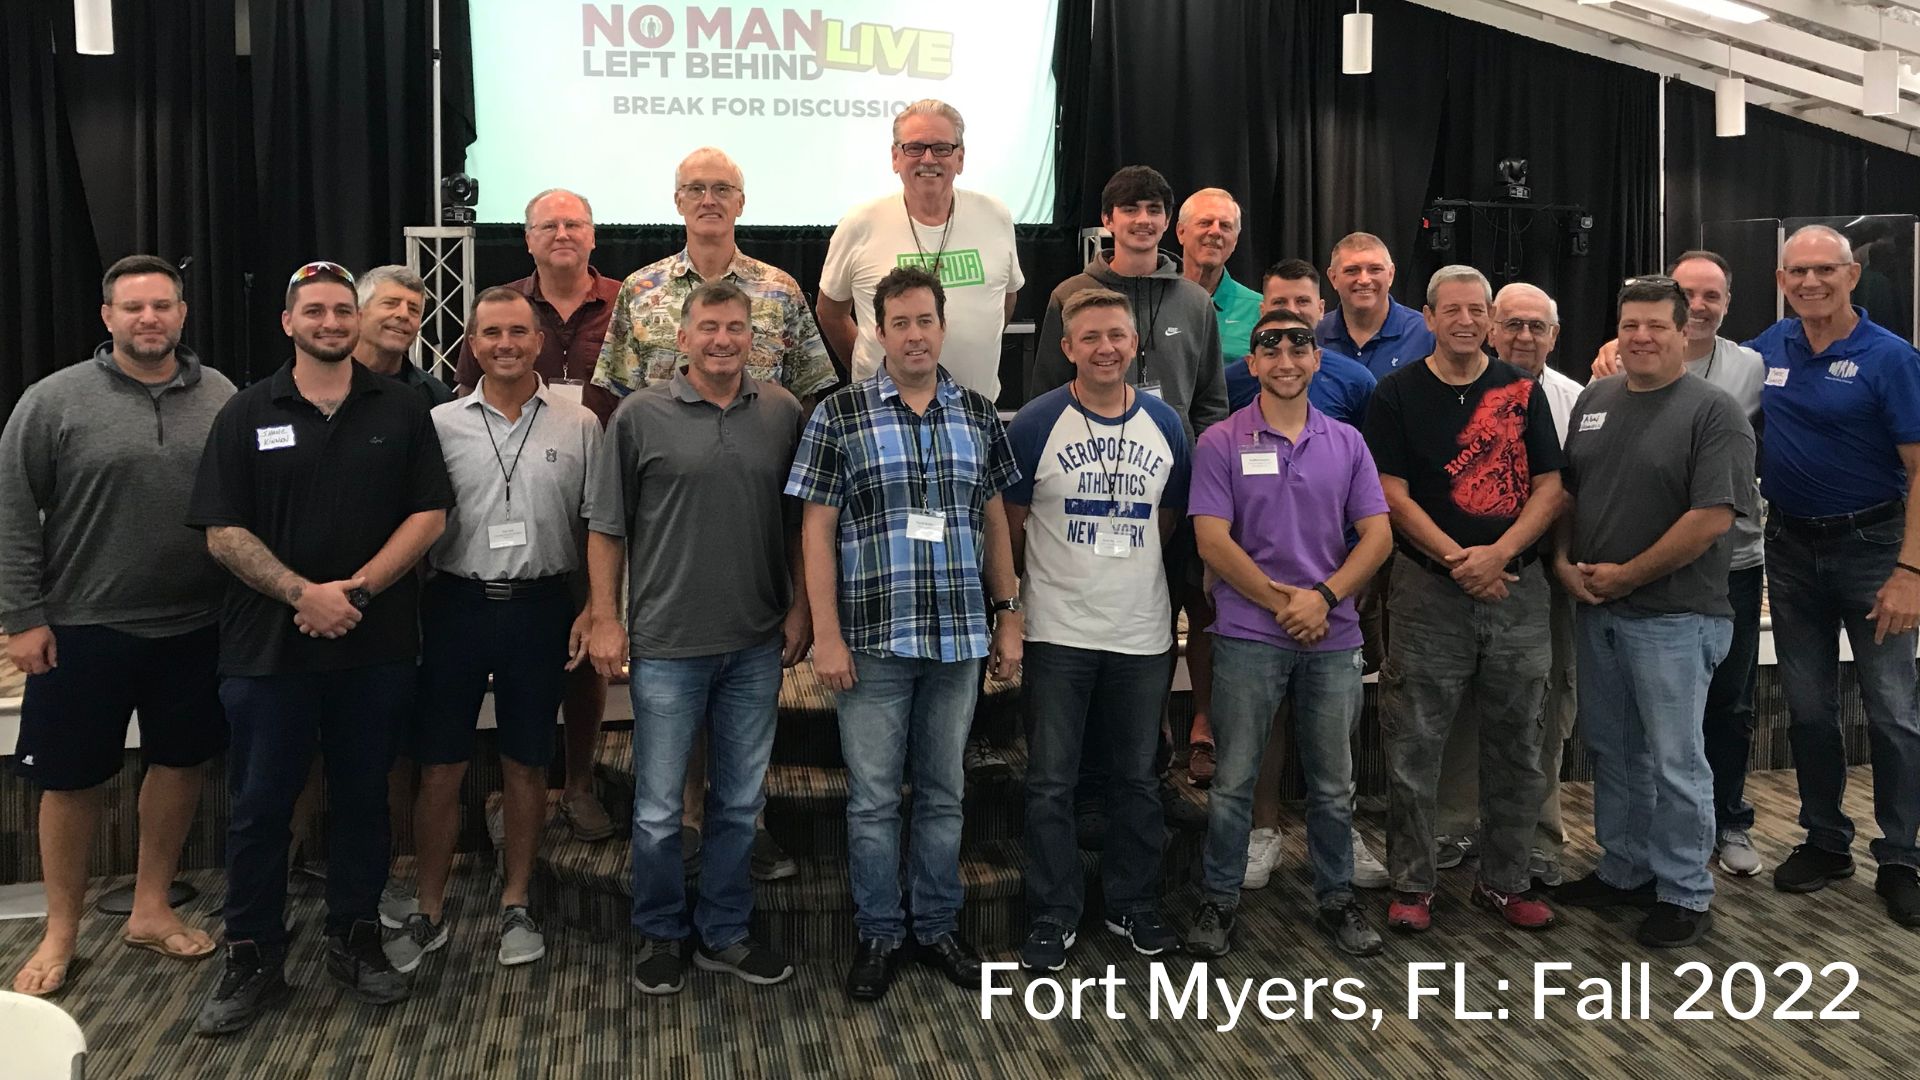 No Man Left Behind group in Fort Myers, FL